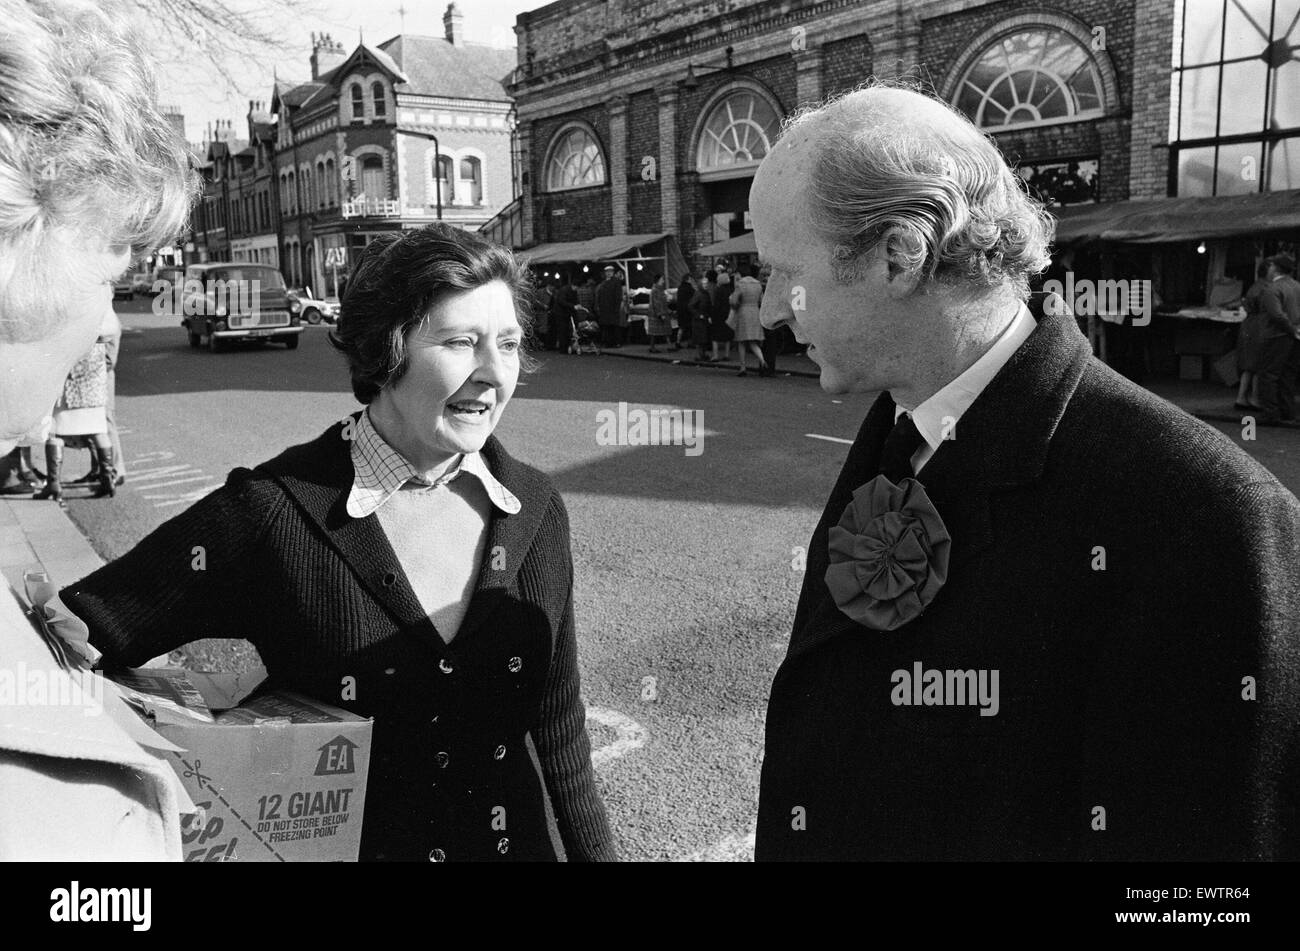 Anthony Barber, Chancellor of the Exchequer and Conservative Member of Parliament for Altrincham and Sale, pictured campaigning in Altrincham and Sale, Greater Manchester, ahead of 1974 General Election, 23rd February 1974. Stock Photo